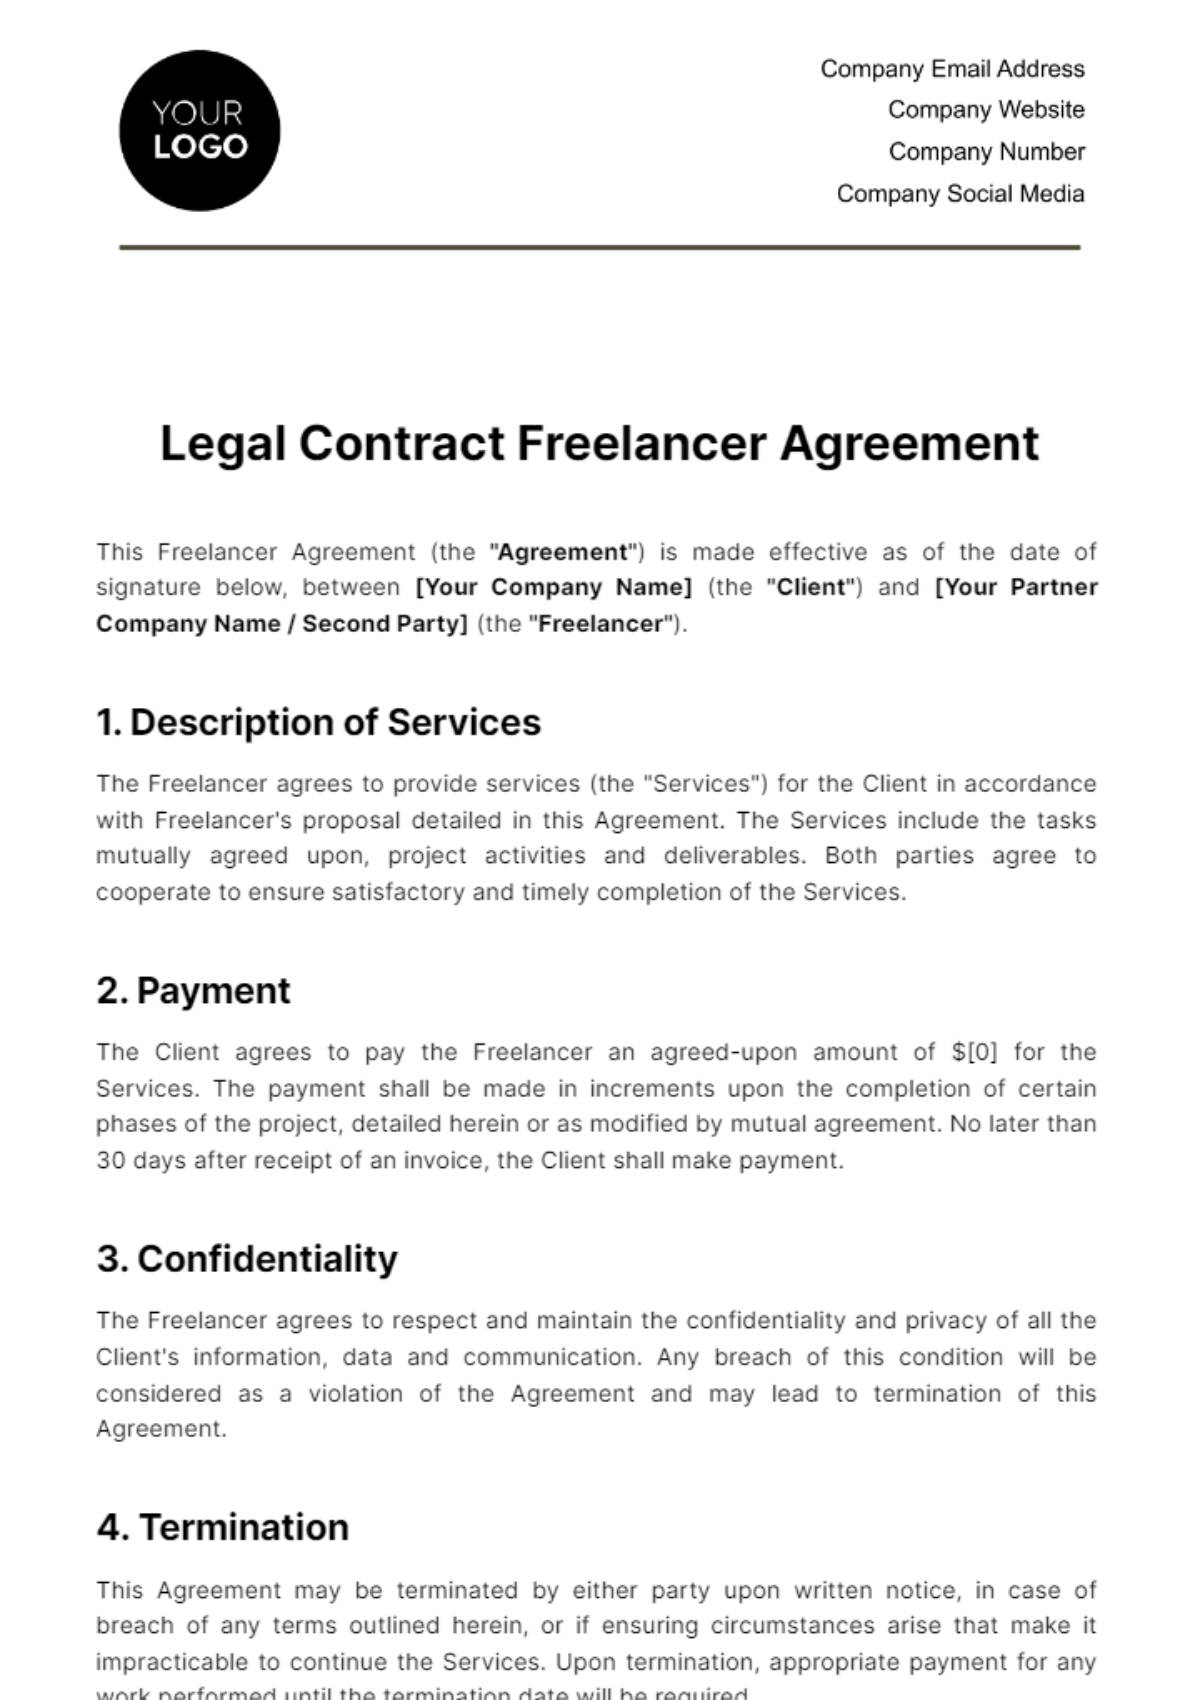 Legal Contract Freelancer Agreement Template